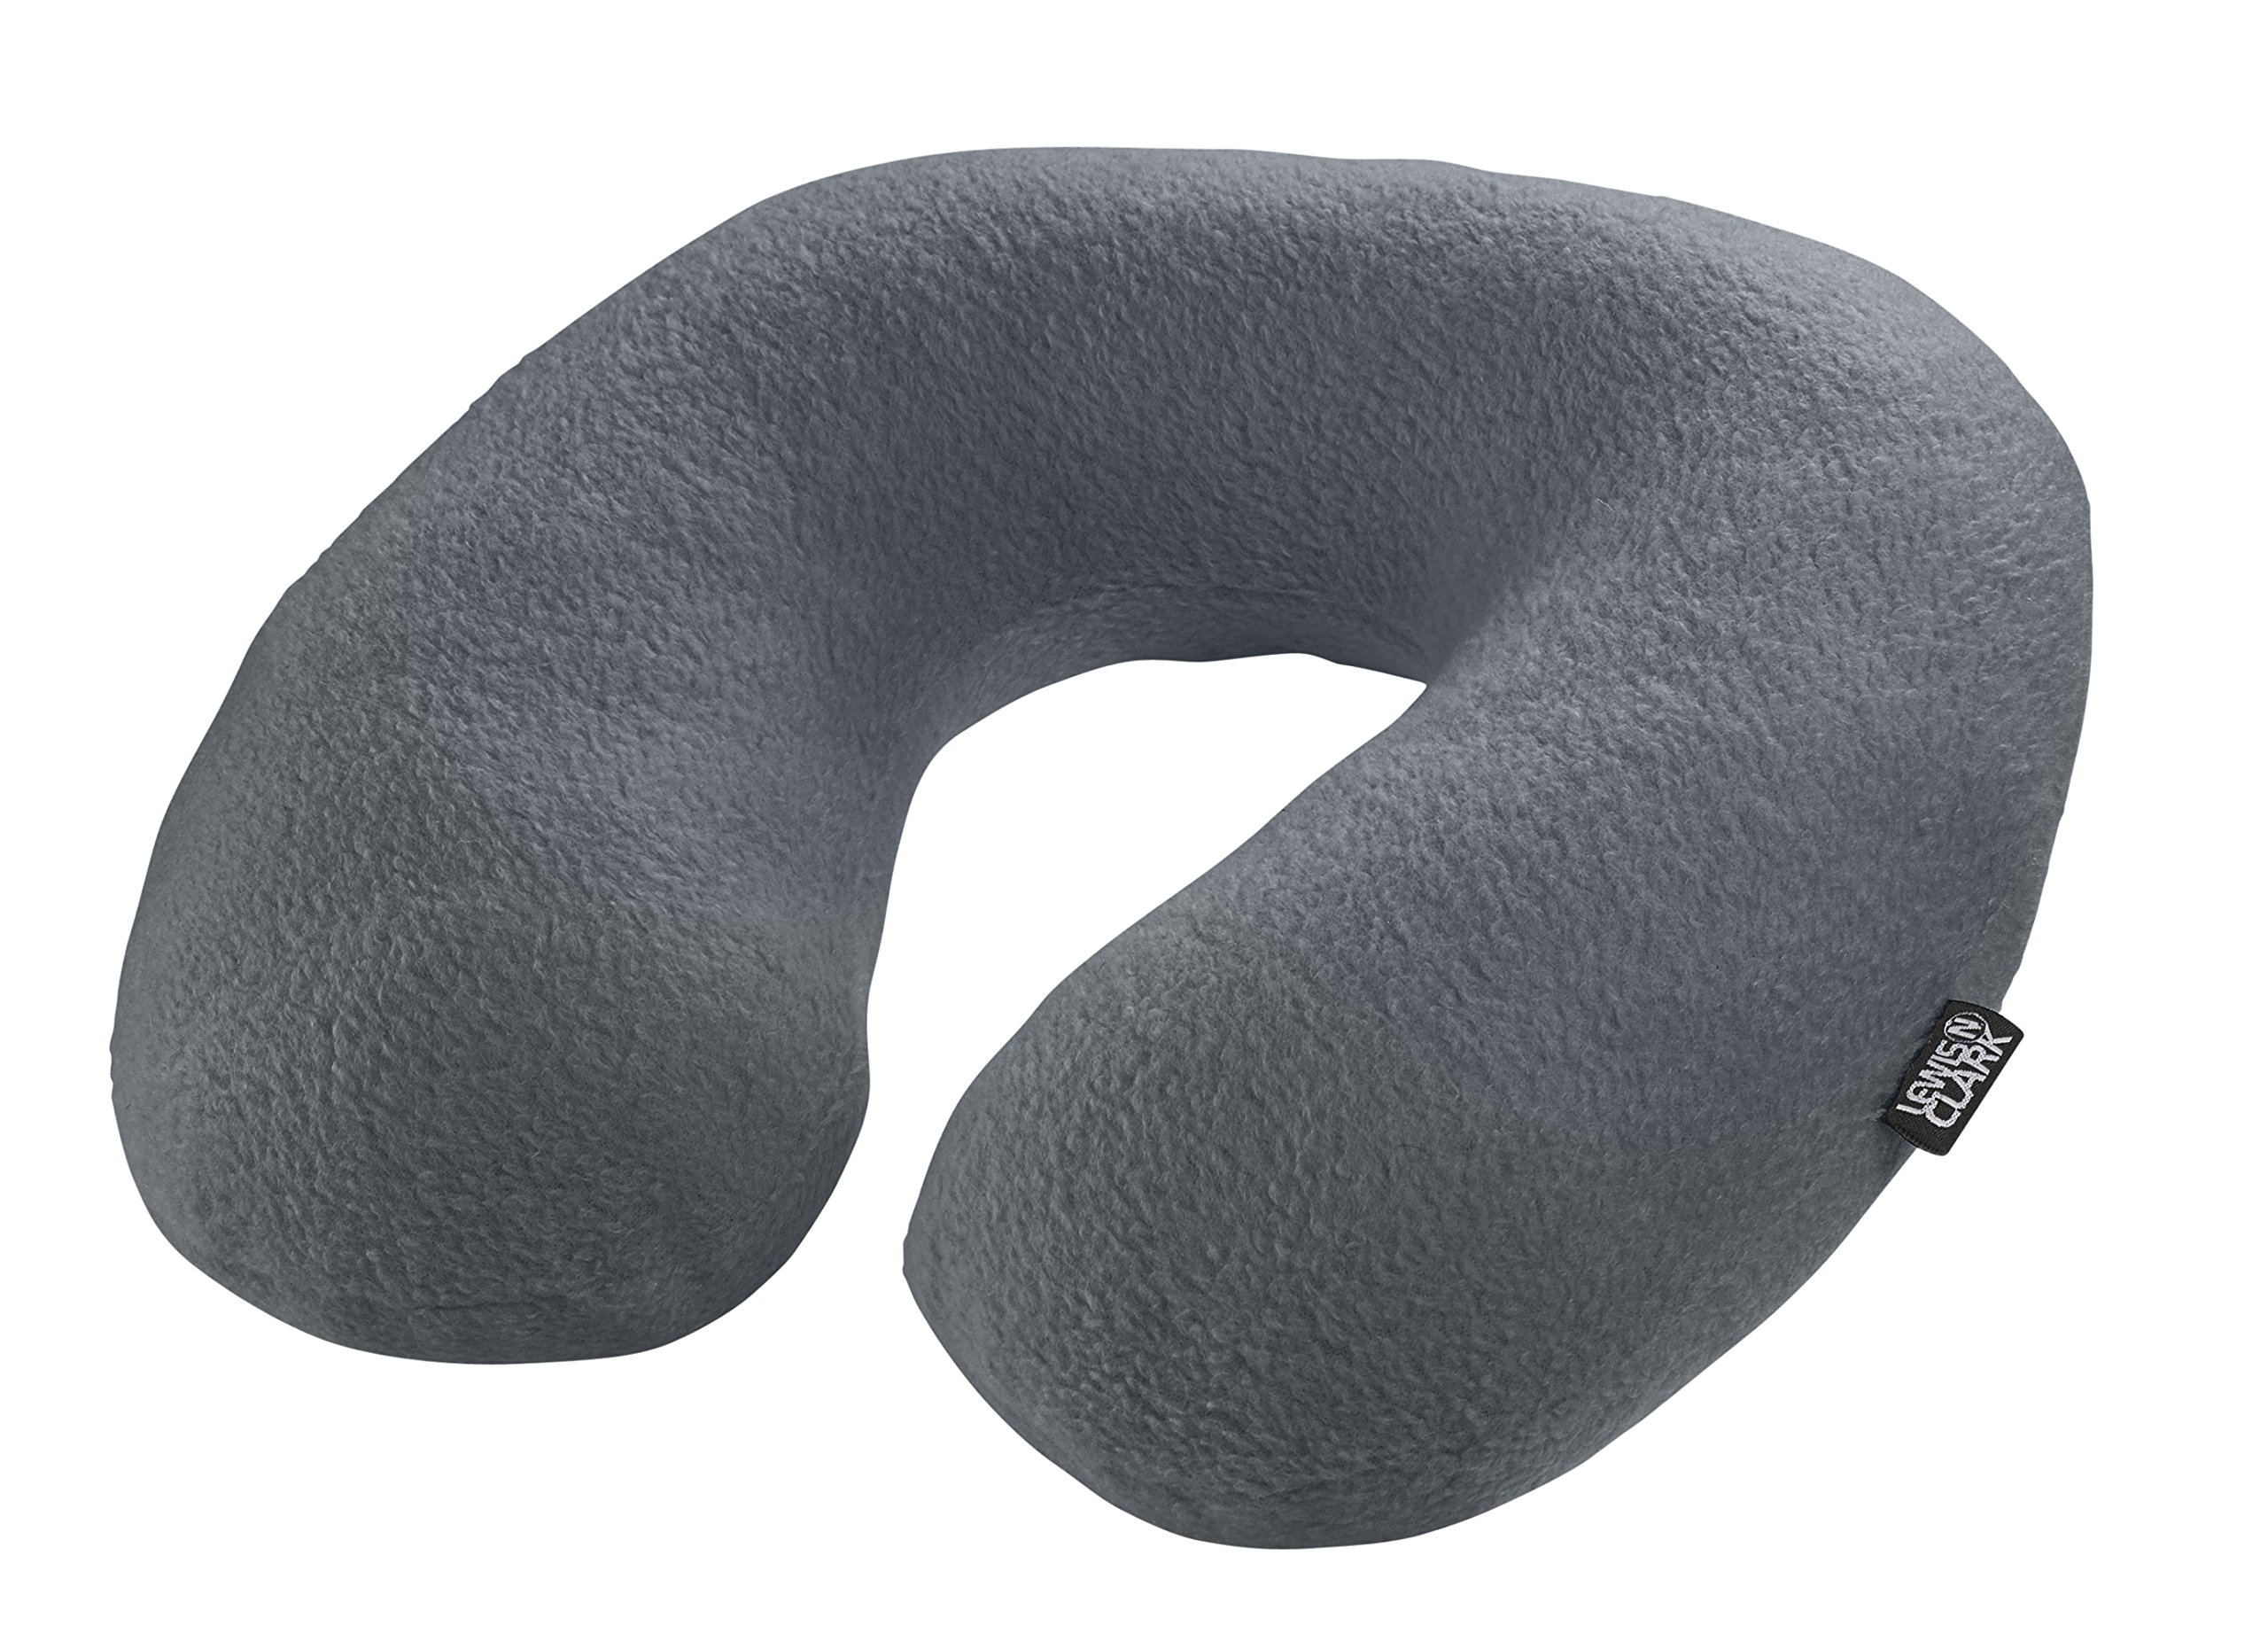 Lewis N. Clark Comfort Neck Travel Pillow: Airplane Pillow and Cervical Neck Pillow for Kids + Adults, Contour Pillow with Neck Support - Gray